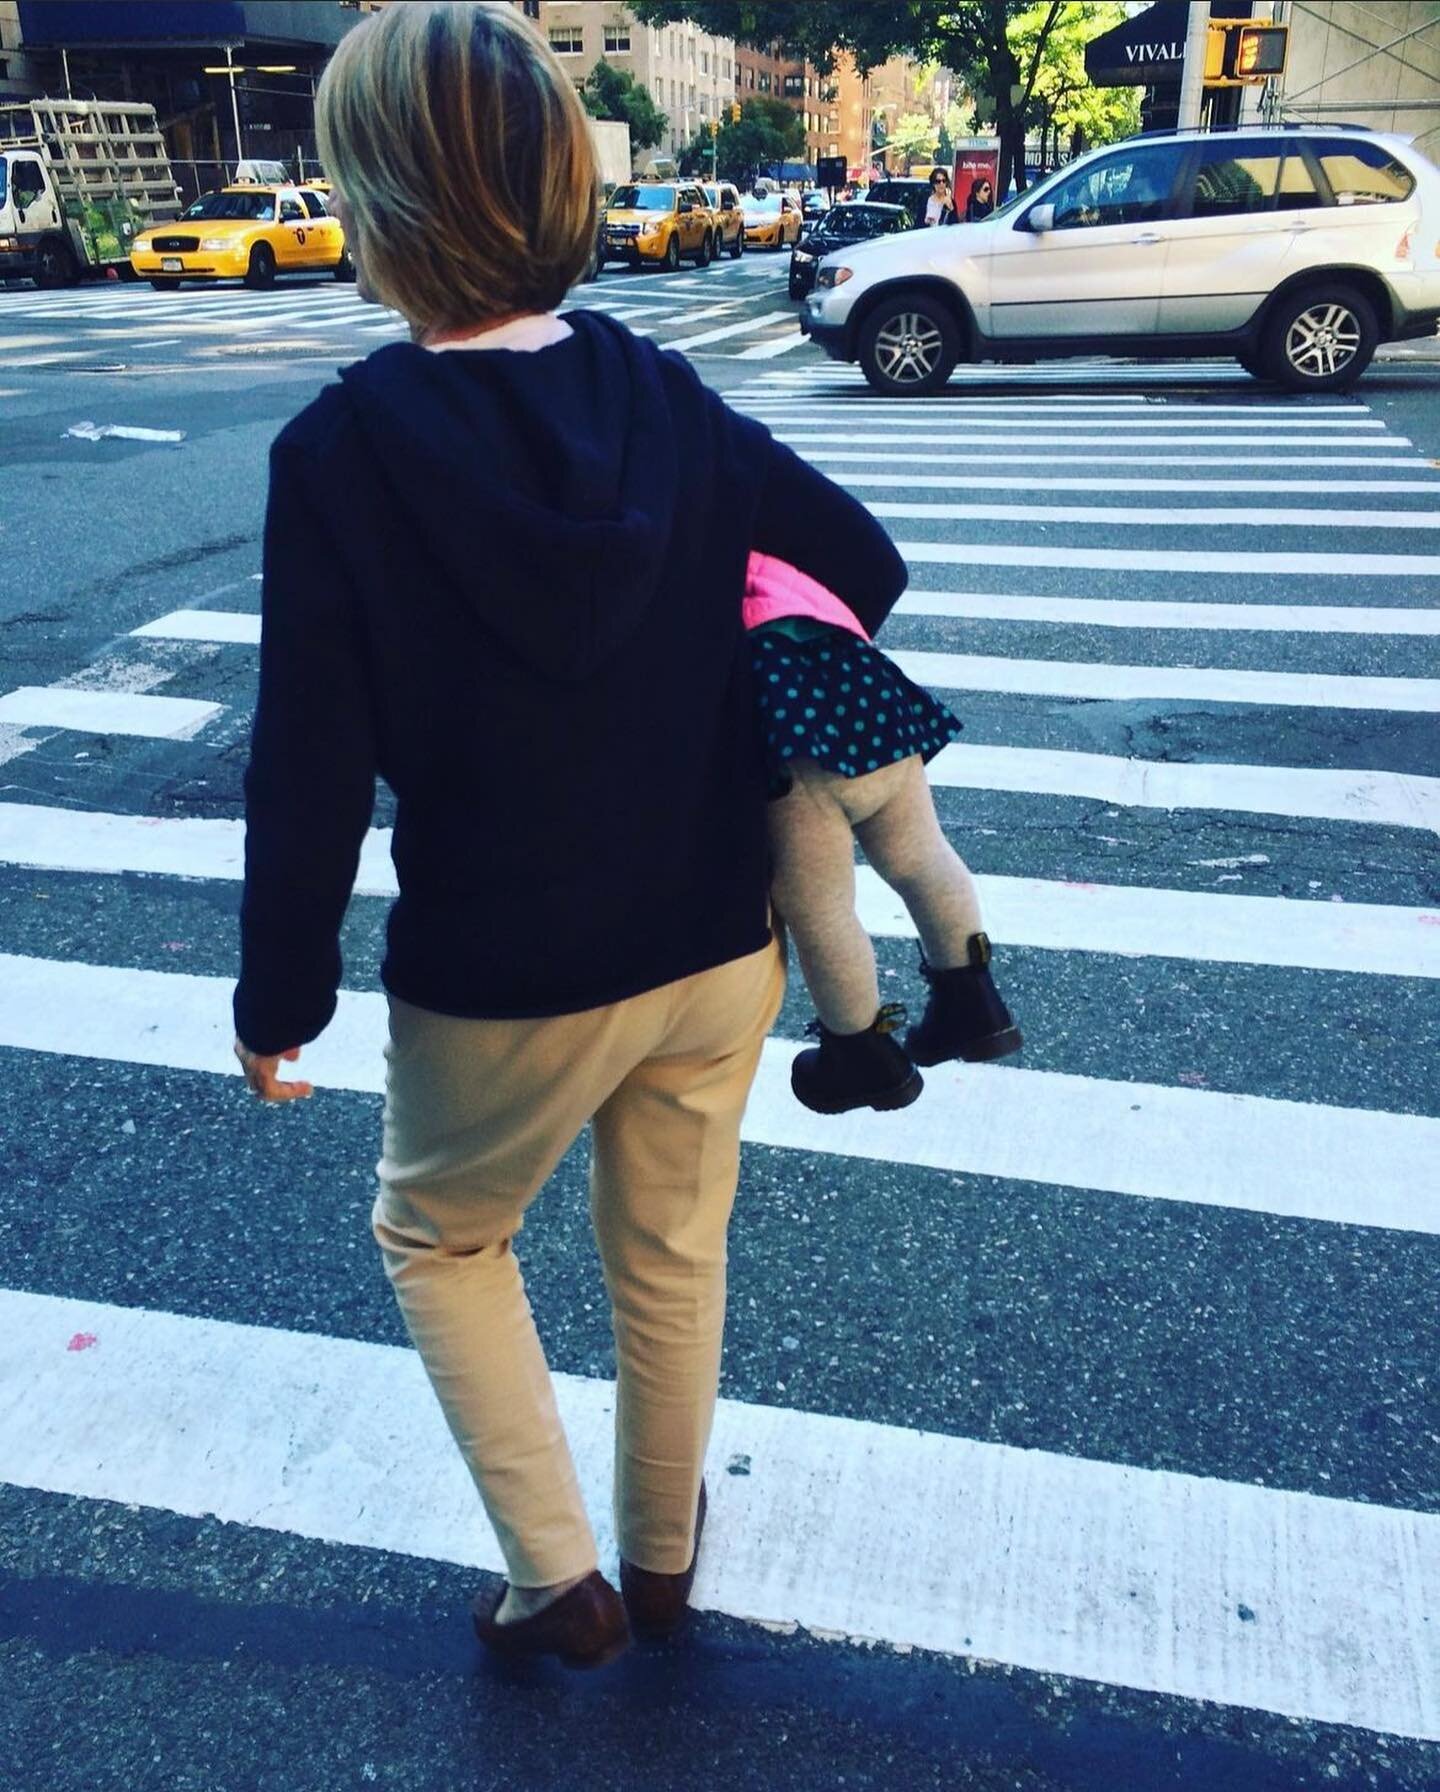 Another great picture of my mom, posted by my sister @llzavell - that&rsquo;s my niece Zoe she is schlepping. Also Mom&rsquo;s hair looks really good. #missyou #mothersday #mother #grandmother